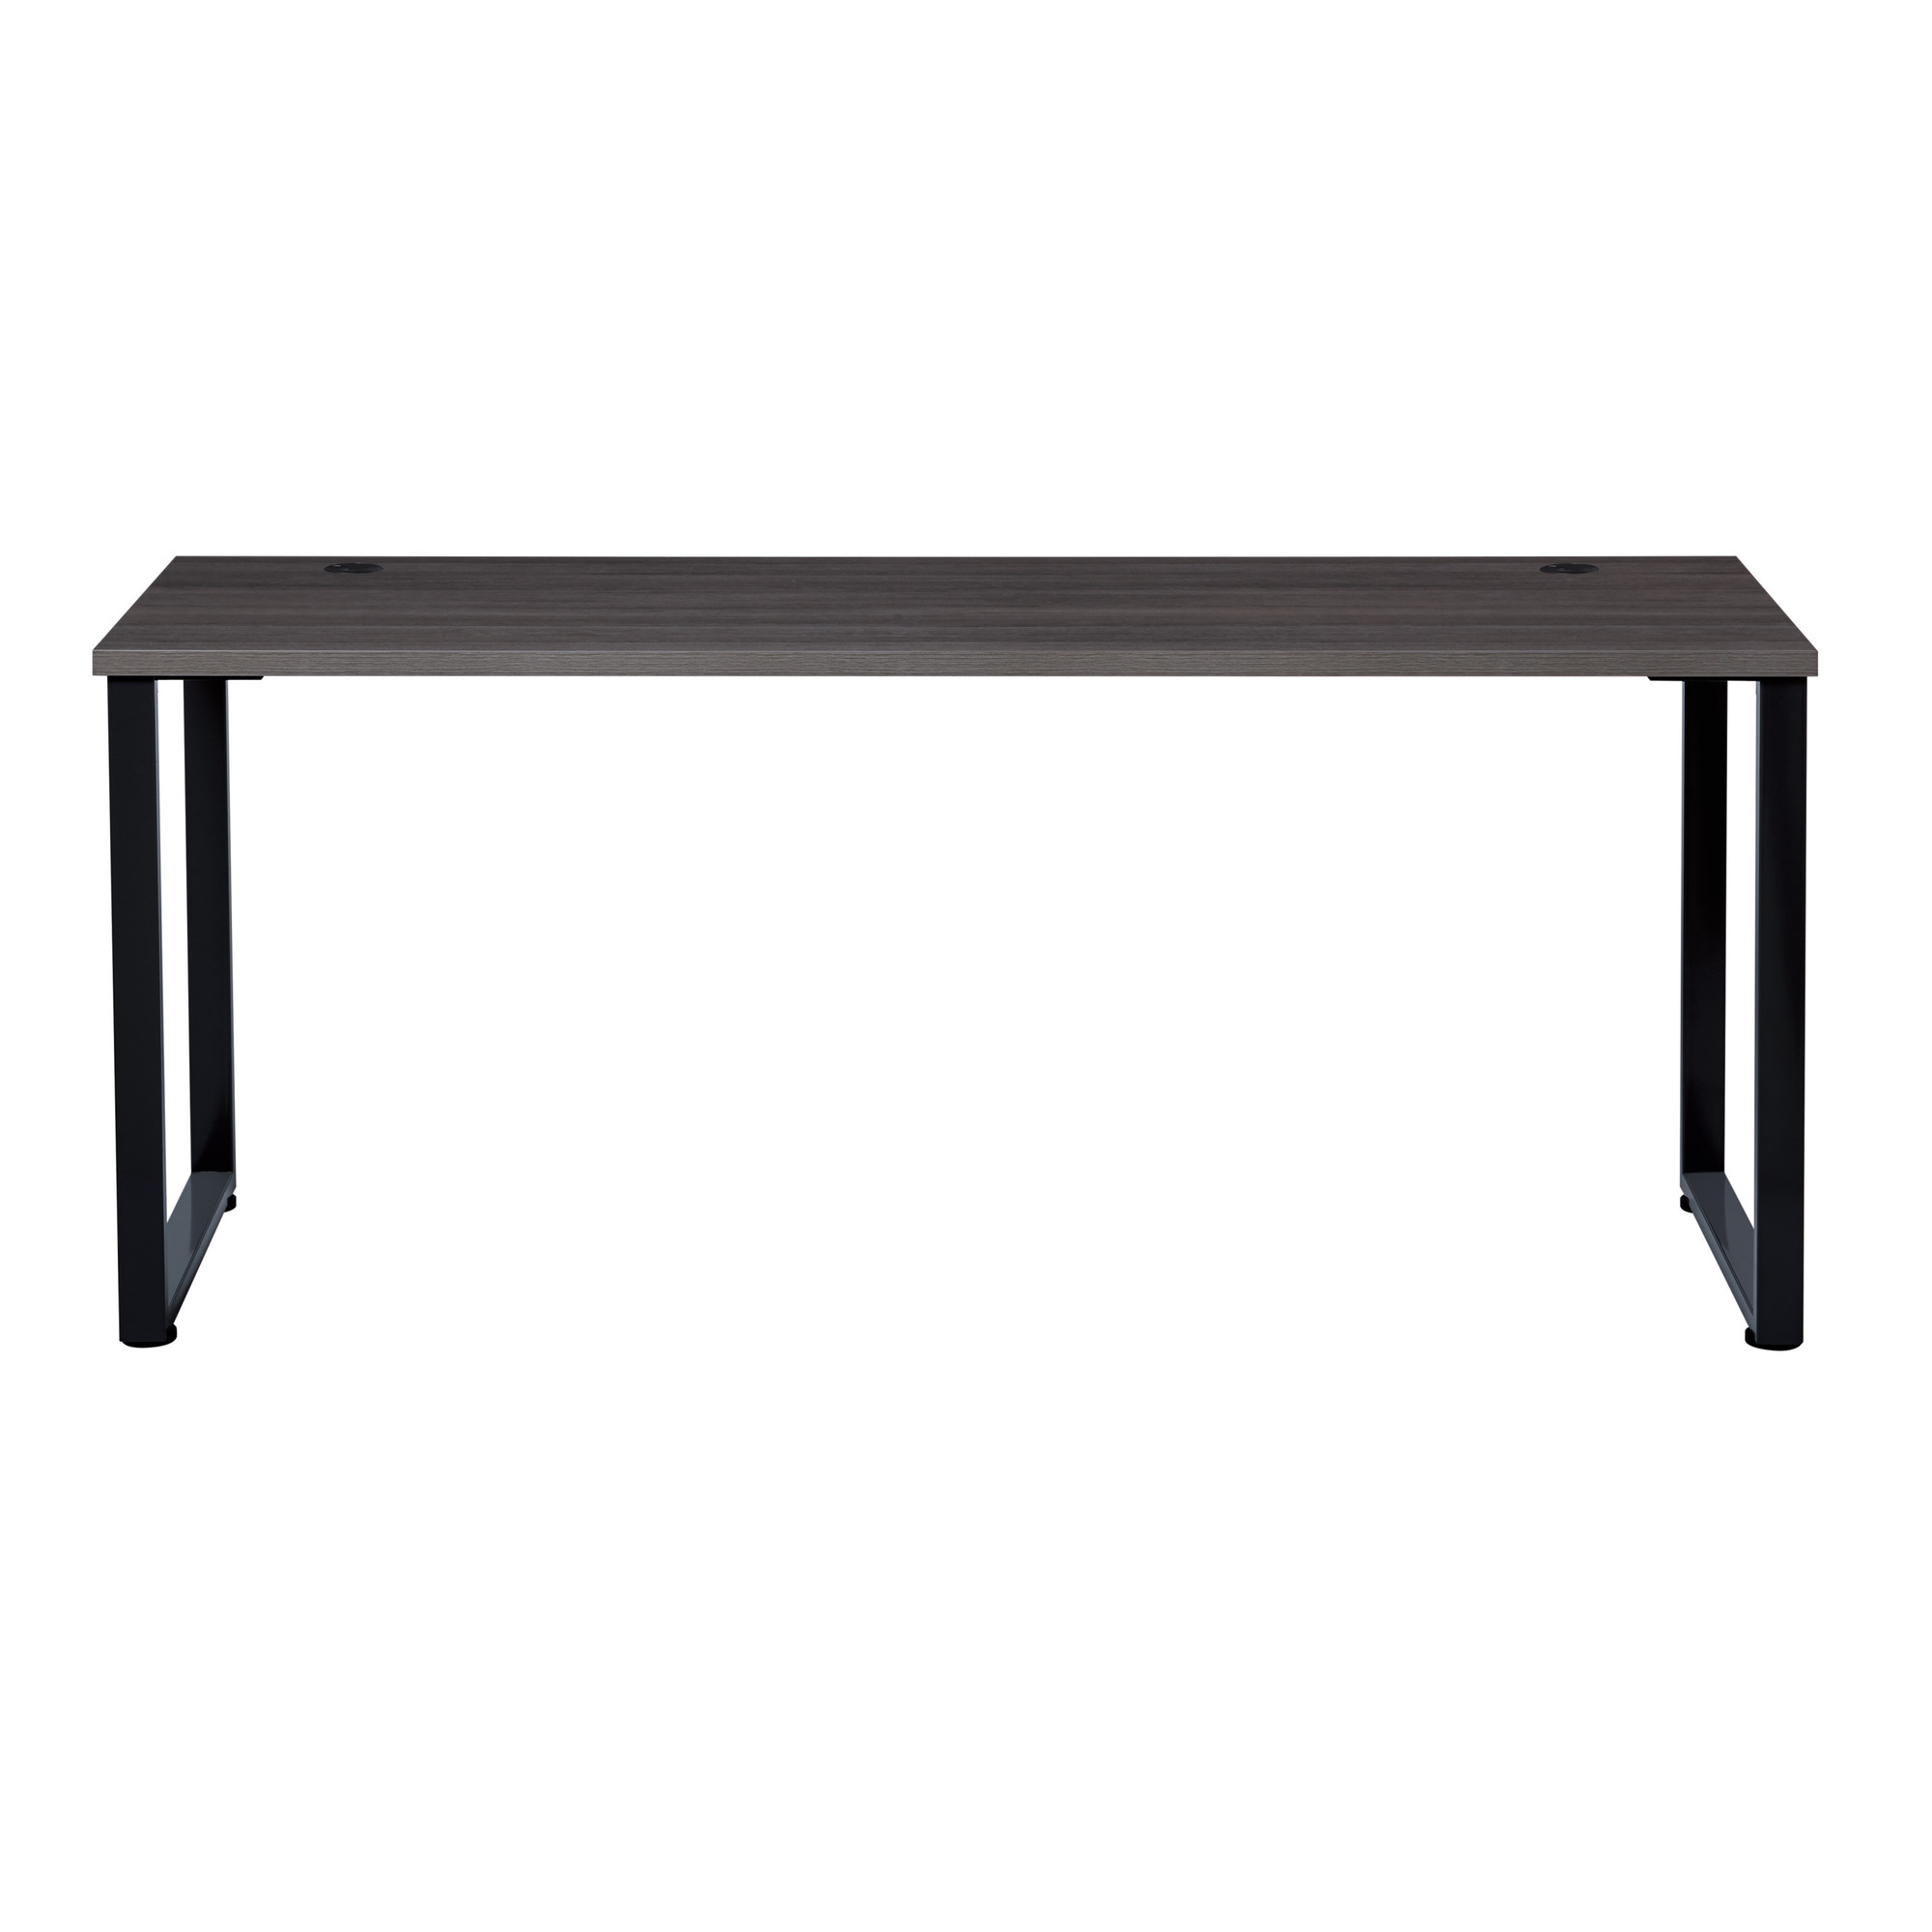 Hirsh Industries, Office Dimensions Open Desk with O-leg, Width 70.9 in, Height 29.9 in, Depth 29.5 in, Model 24782